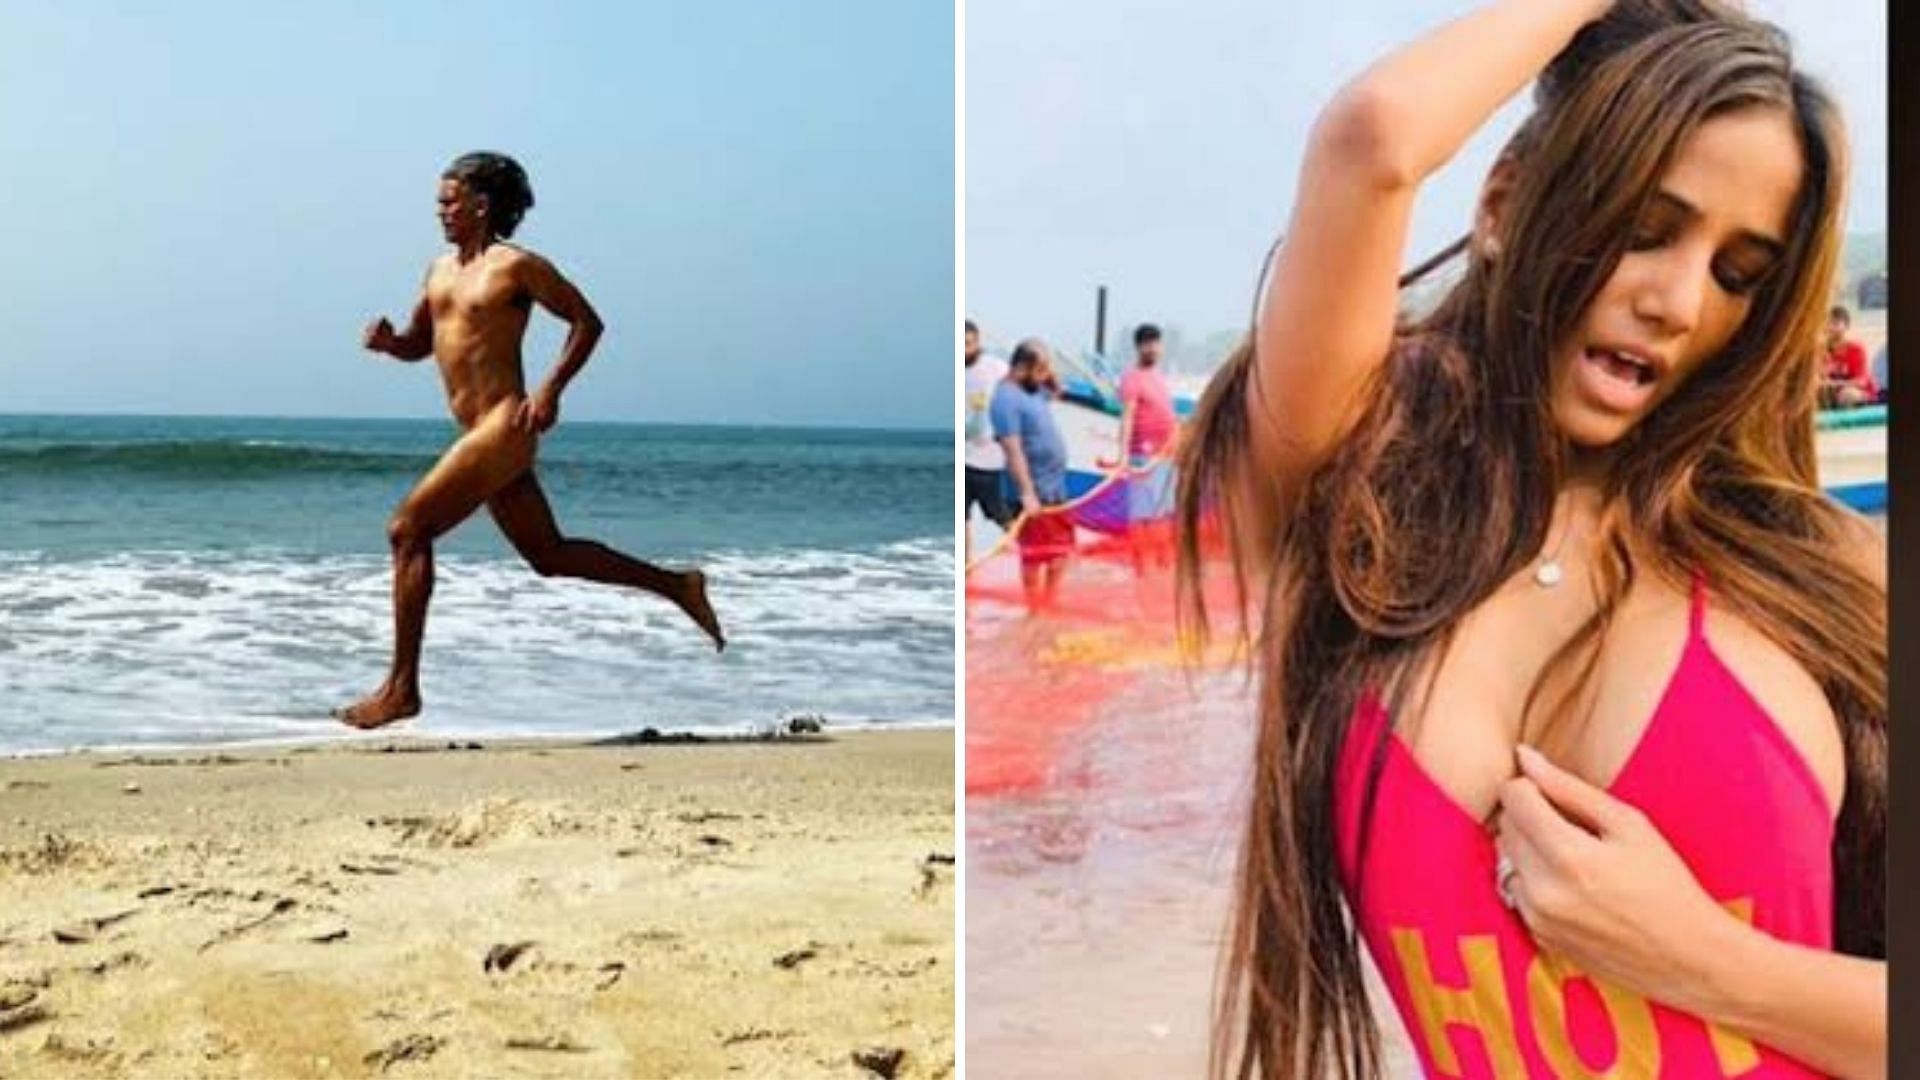 FIR Against Milind Soman: Soman, who turned 55 on Wednesday, had posted a photograph of him running nude by a beach in Goa, captioned “55 and running!” The photograph was clicked by his wife.